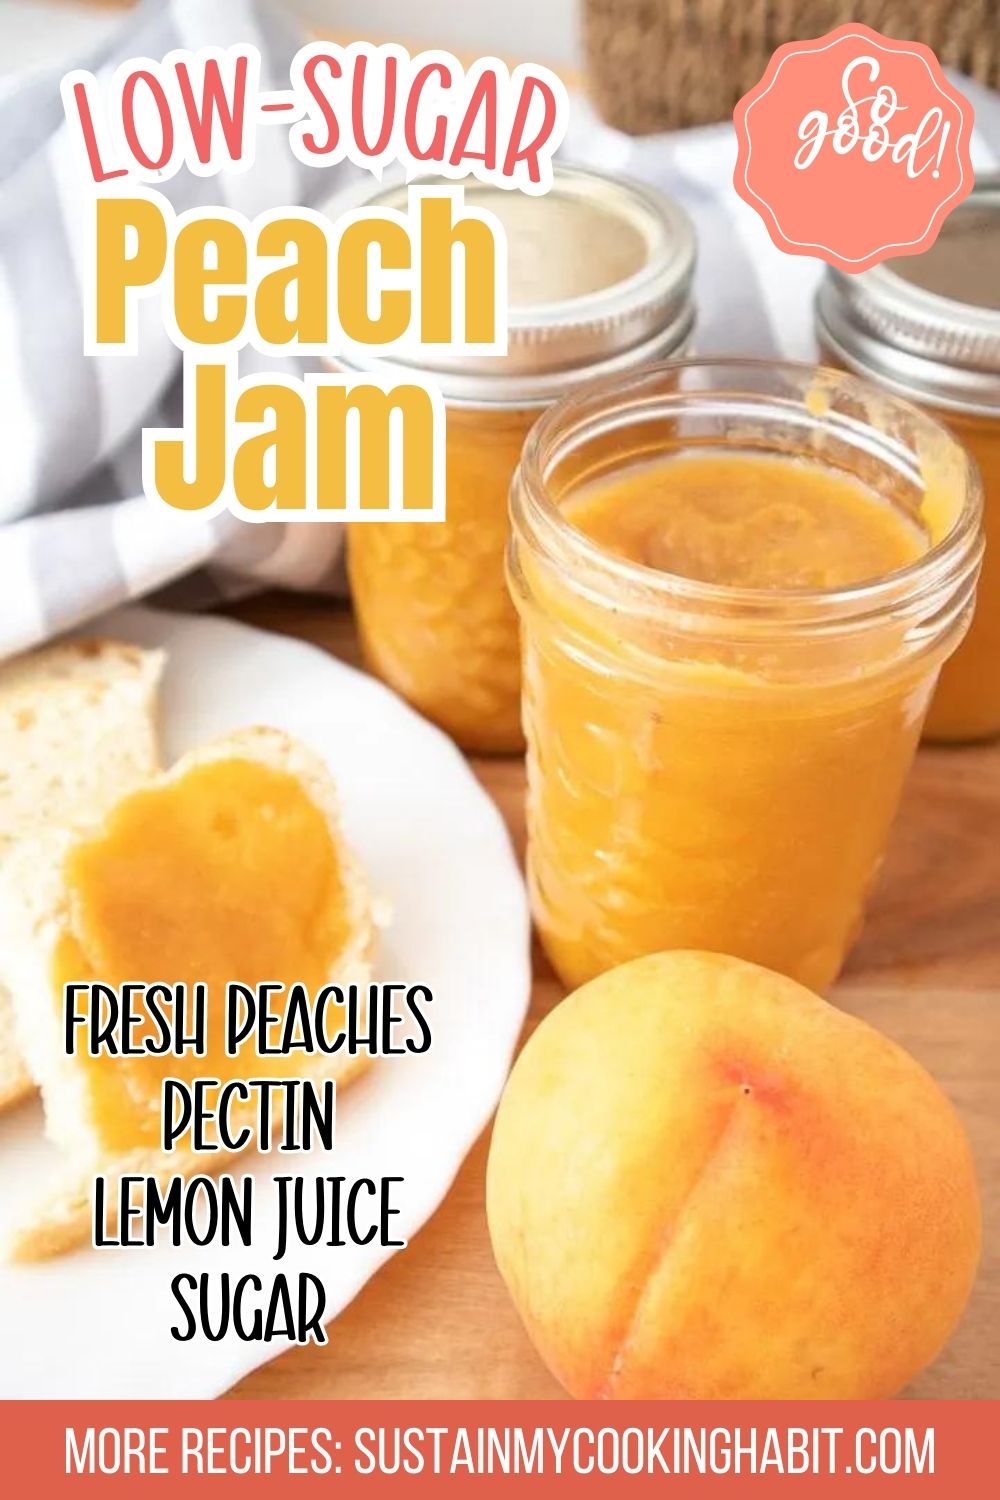 Jars of peach jam on a wood surface surrounded by fresh peaches.